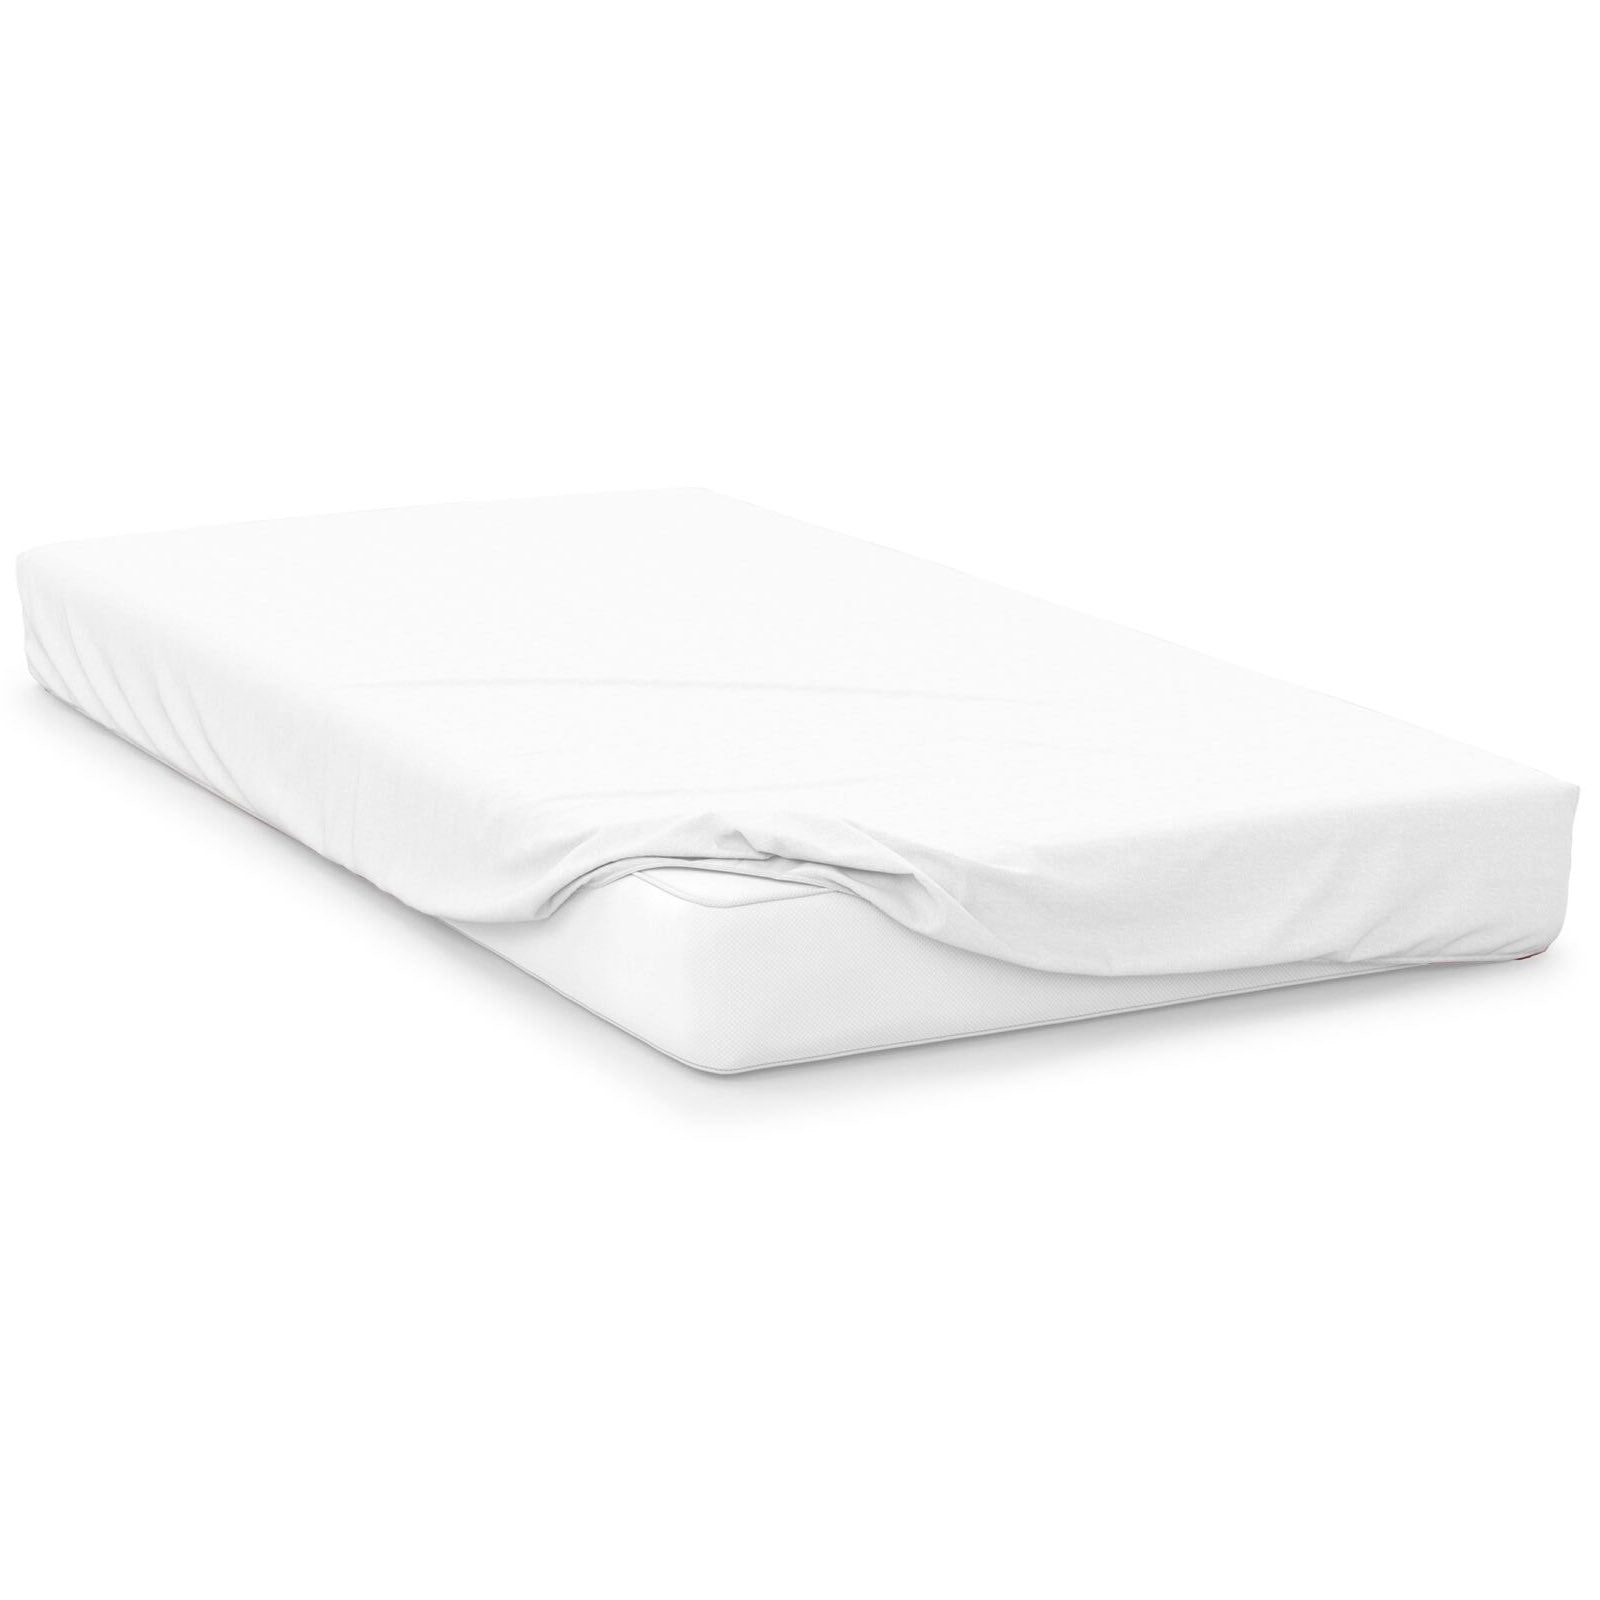 Riggs Premier Flannelette Brushed Cotton Sheets - White